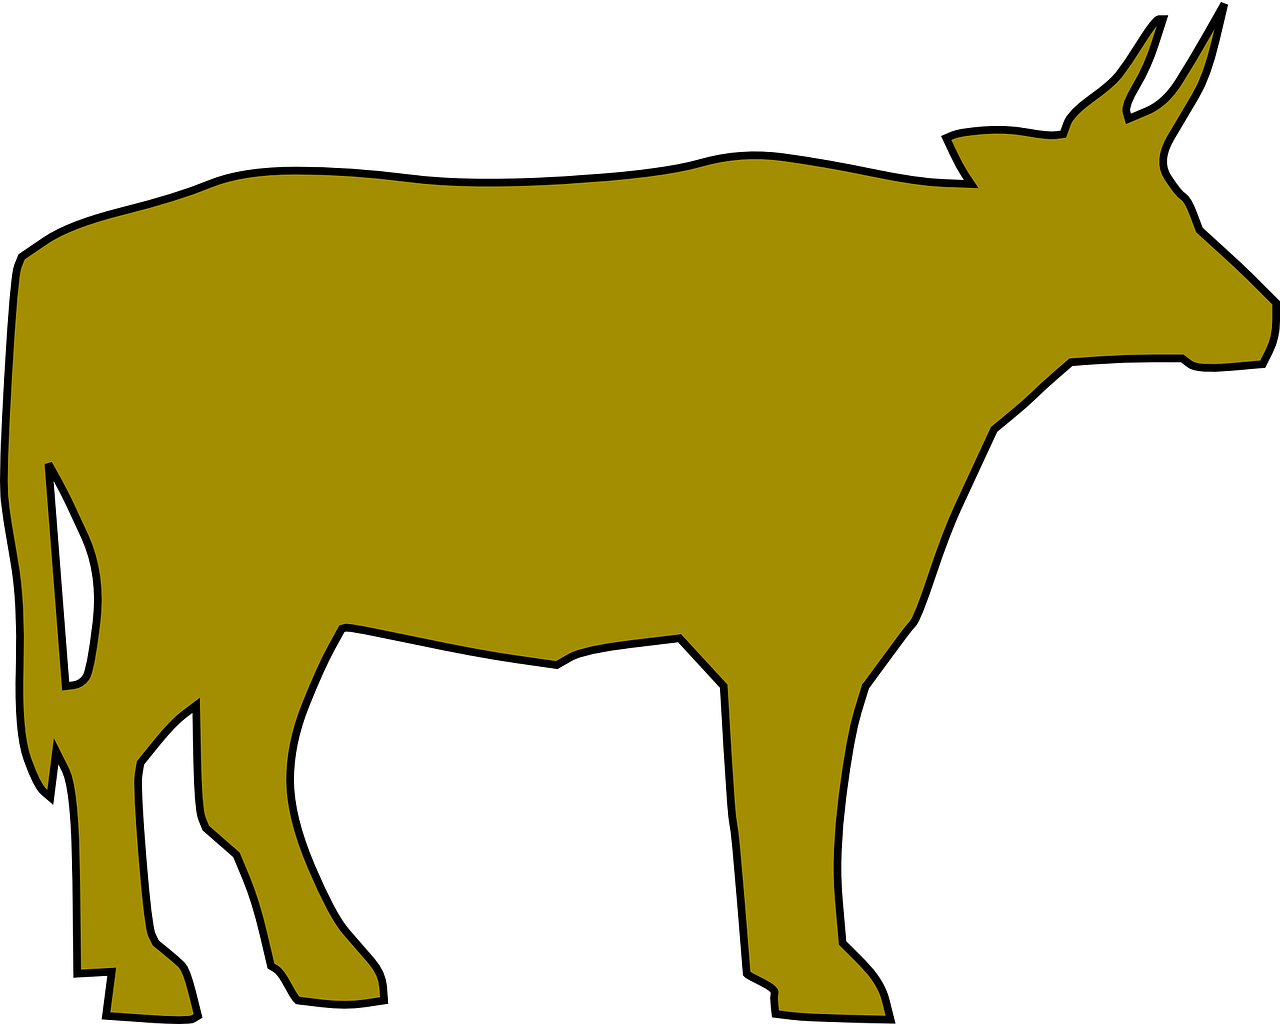 Cattle Farm Cow Milk Beef Transparent Image - Yellow Cow Clipart (1280x1024)